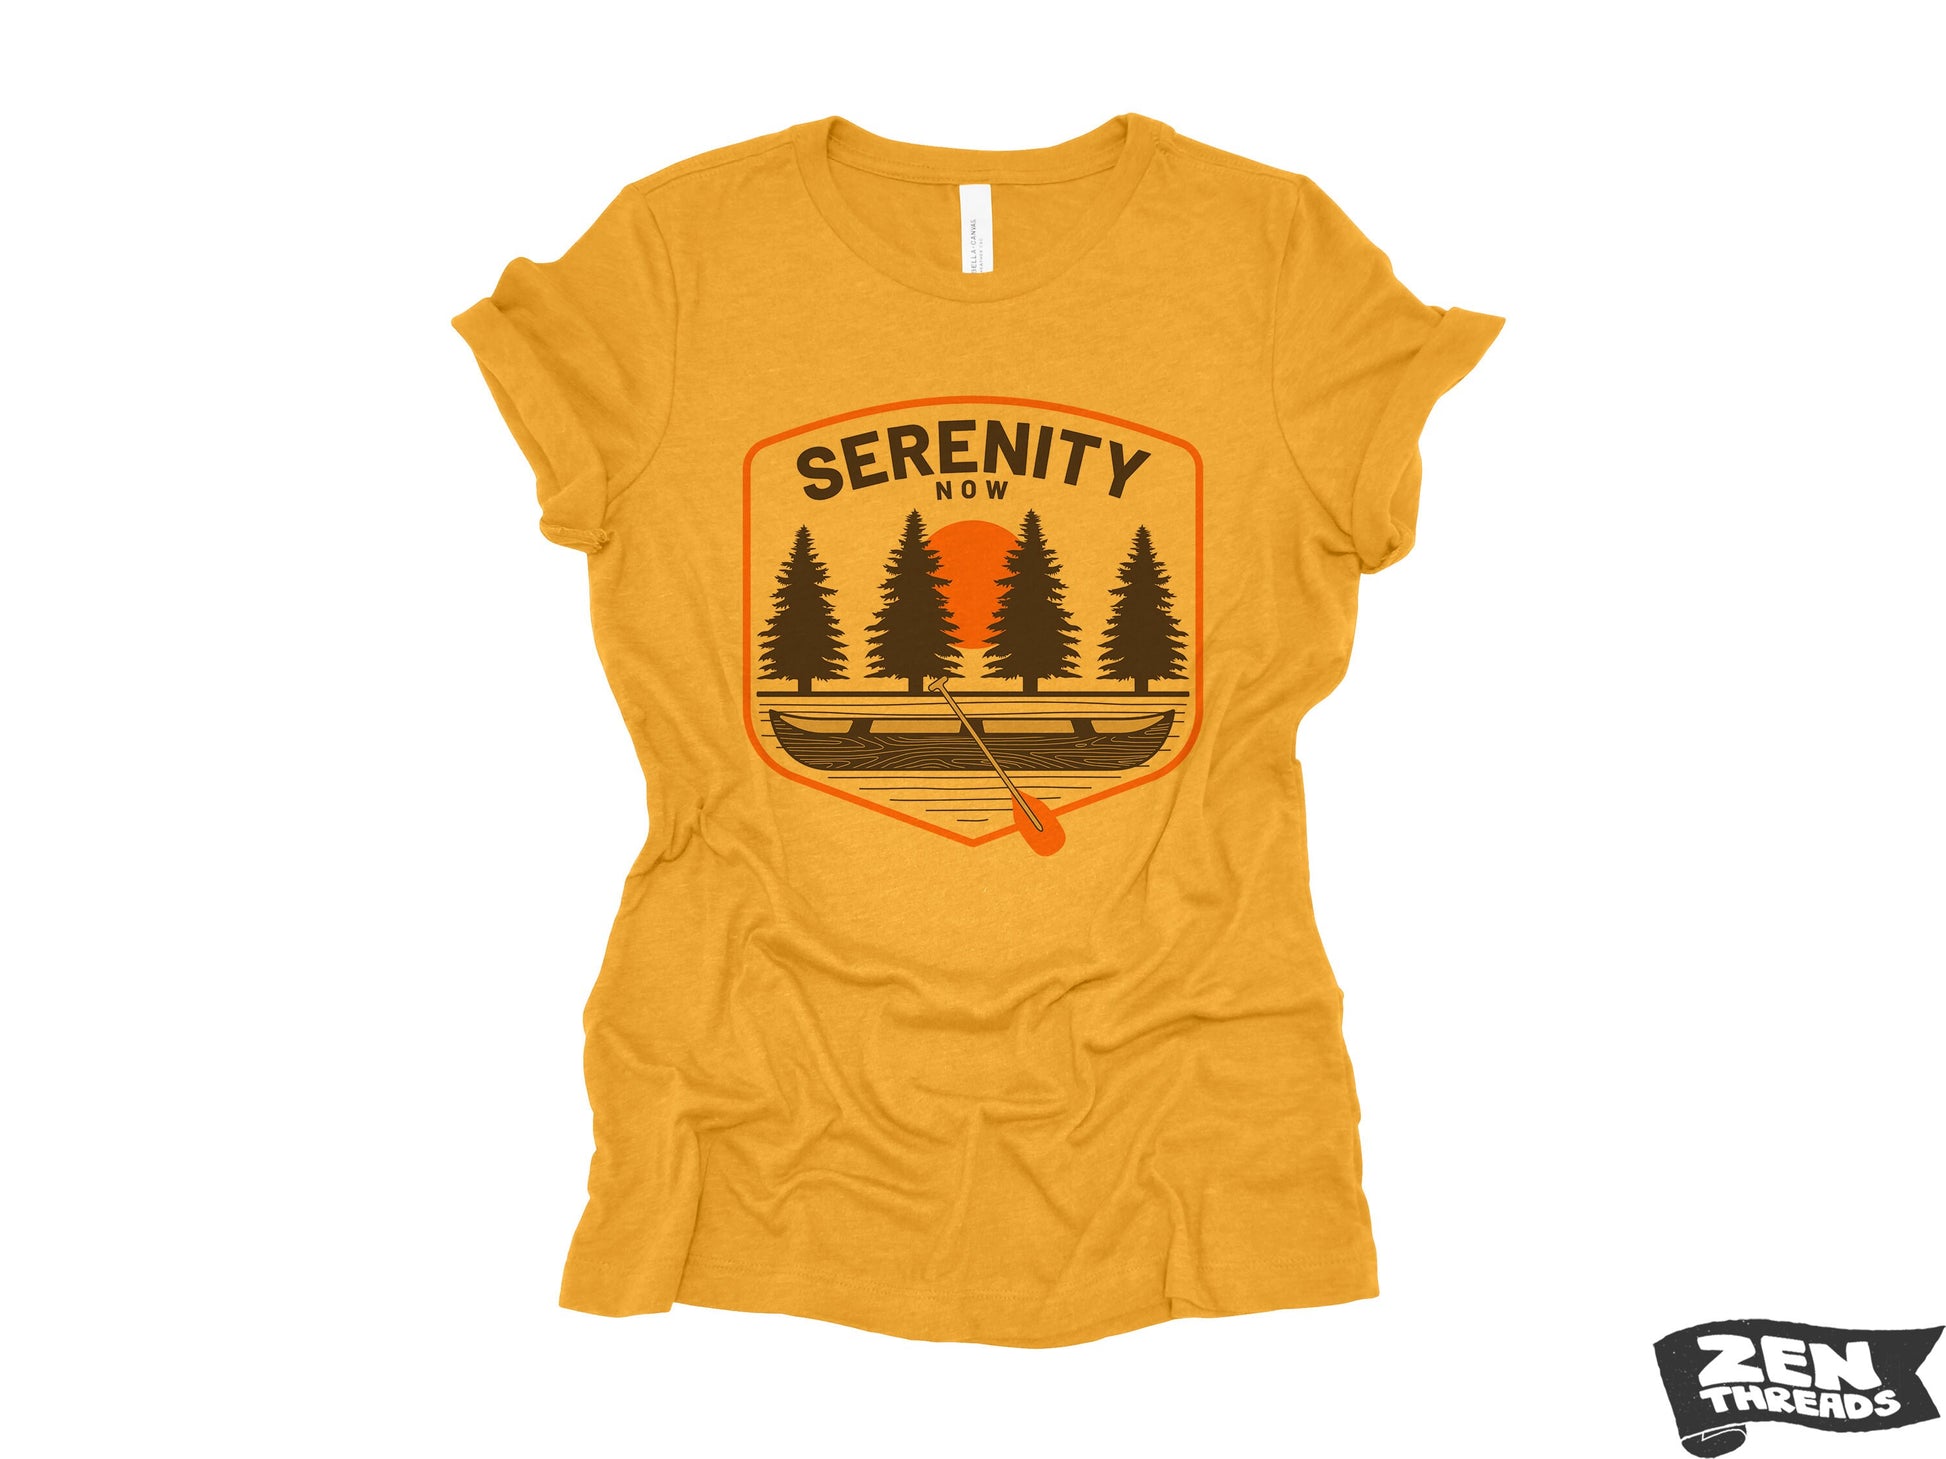 Womens SERENITY Now Boyfriend Tee relaxed jersey T-shirt Zen Threads + Bella Canvas 6400 custom ladies crew camping outdoors kayak paddle